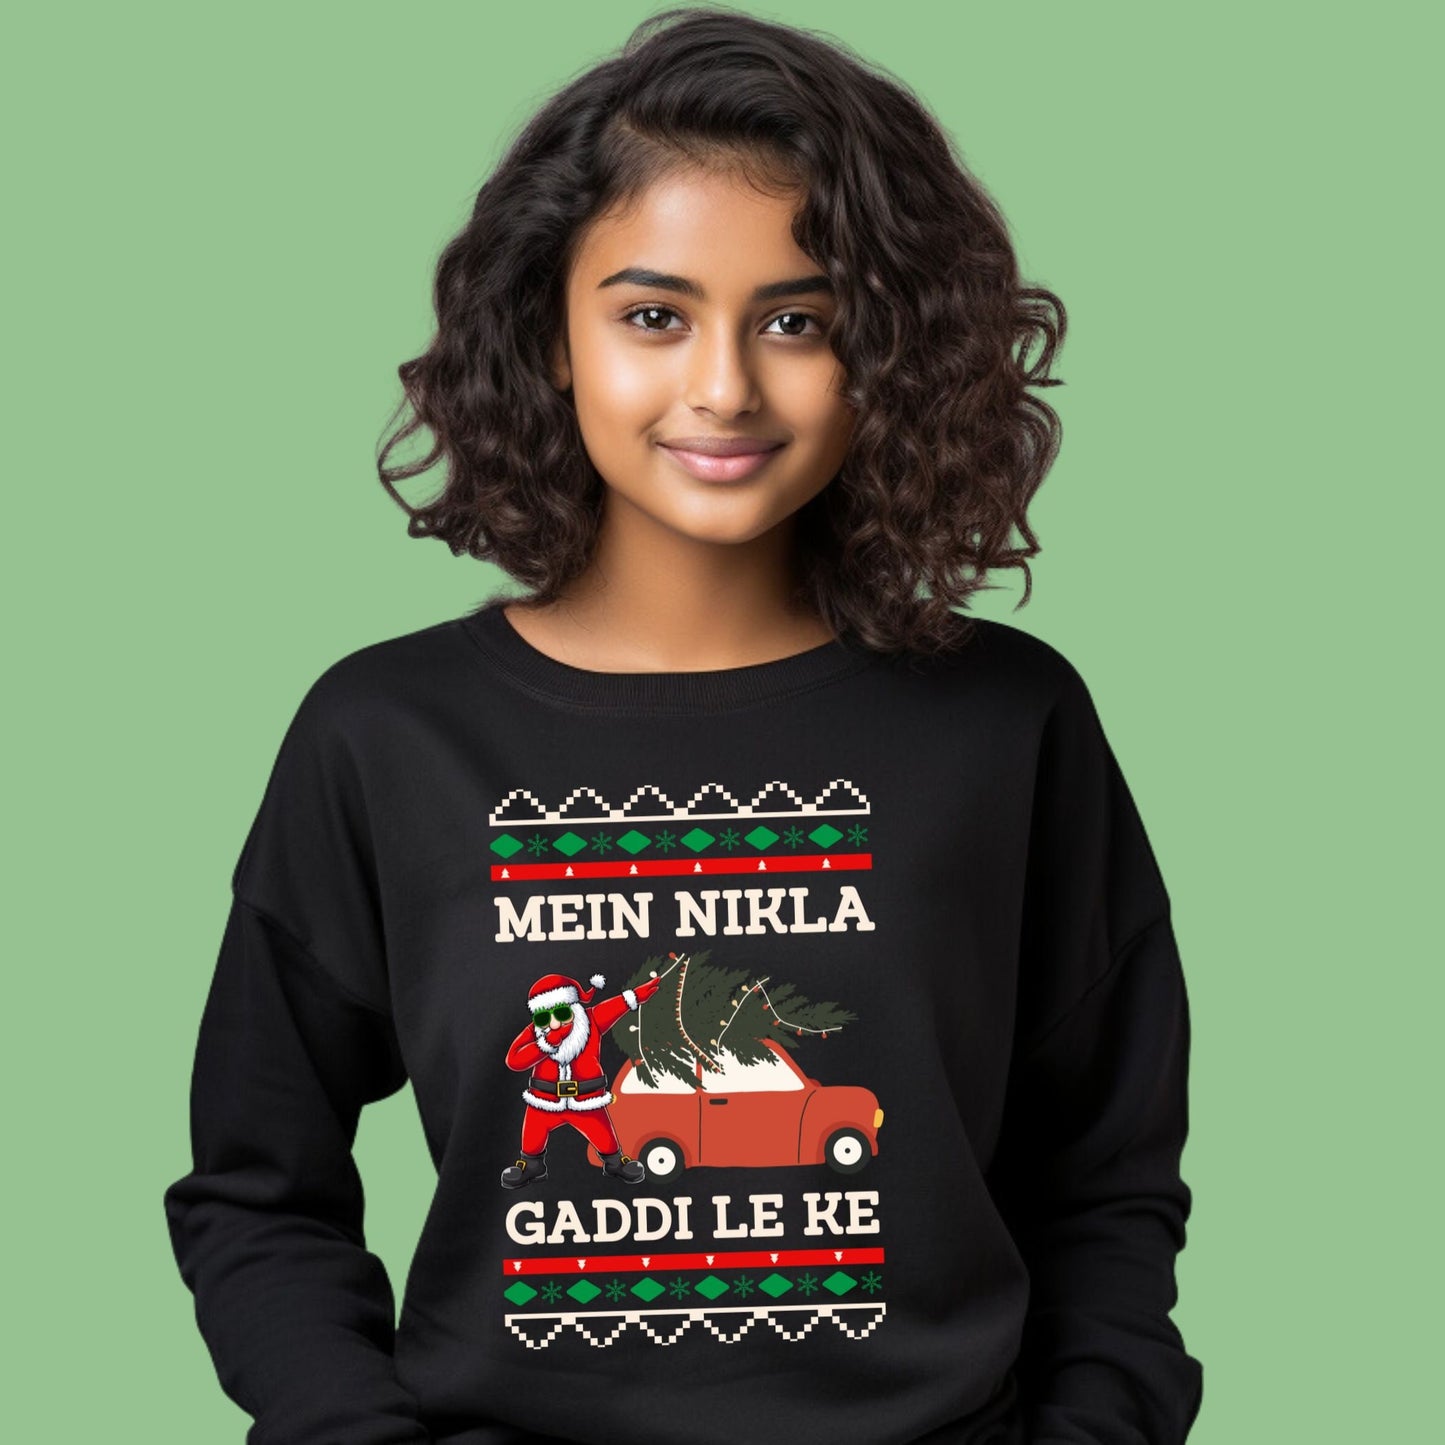 Desi Ugly Christmas Sweatshirt, Punjabi Graphic, Gift for Indian Friend, SecretSanta, Indian Christmas Outfit, Ugly Sweater, Funny Outfit